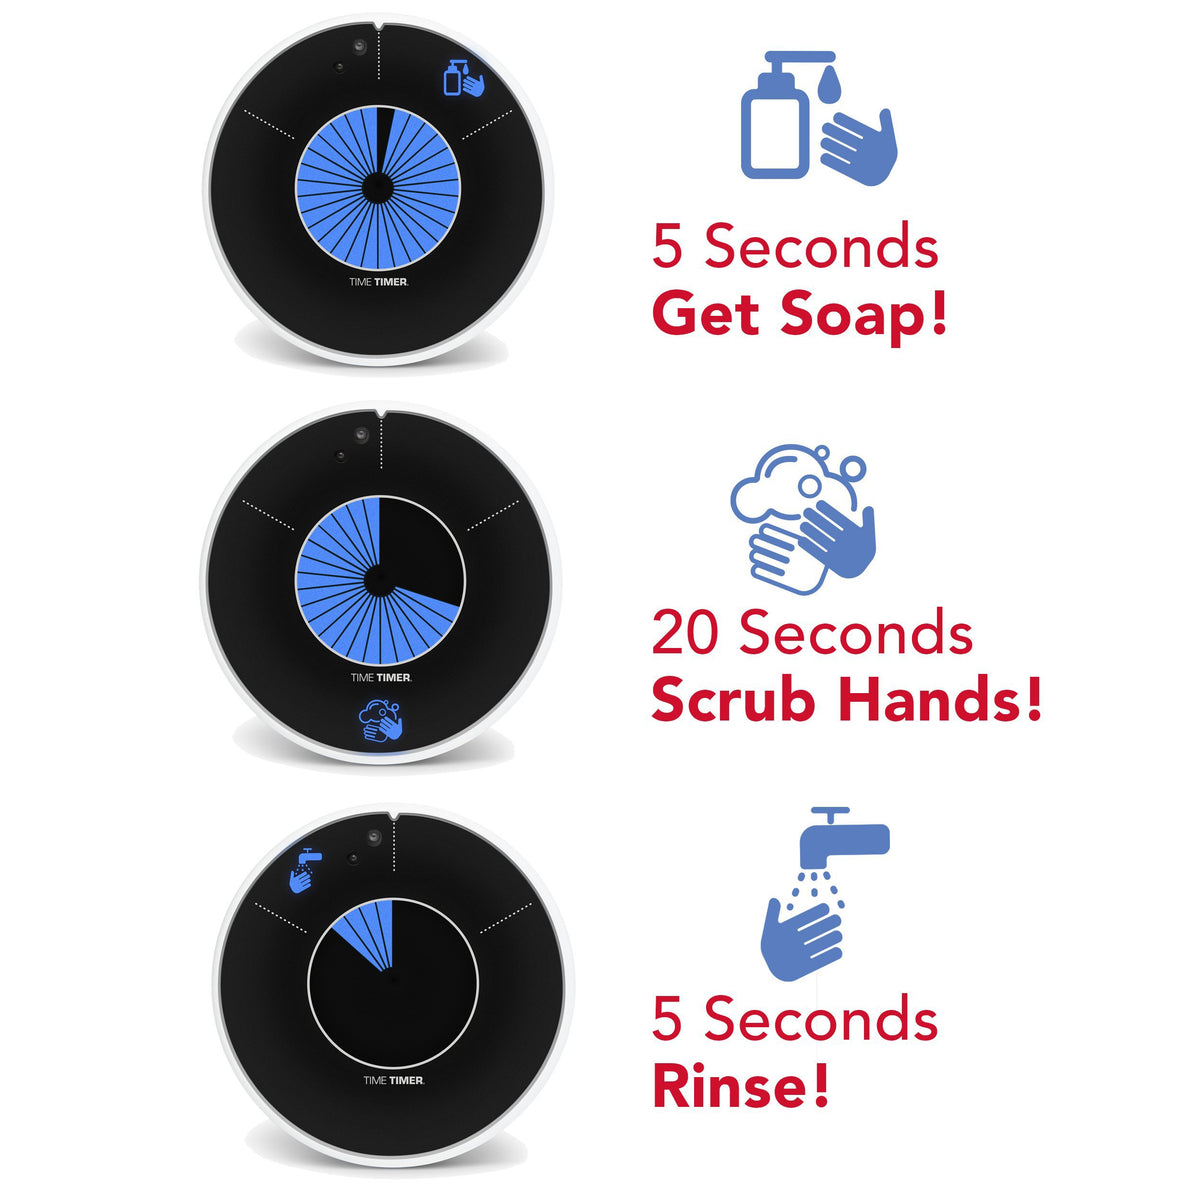 time-timer-wash-30-second- (5)